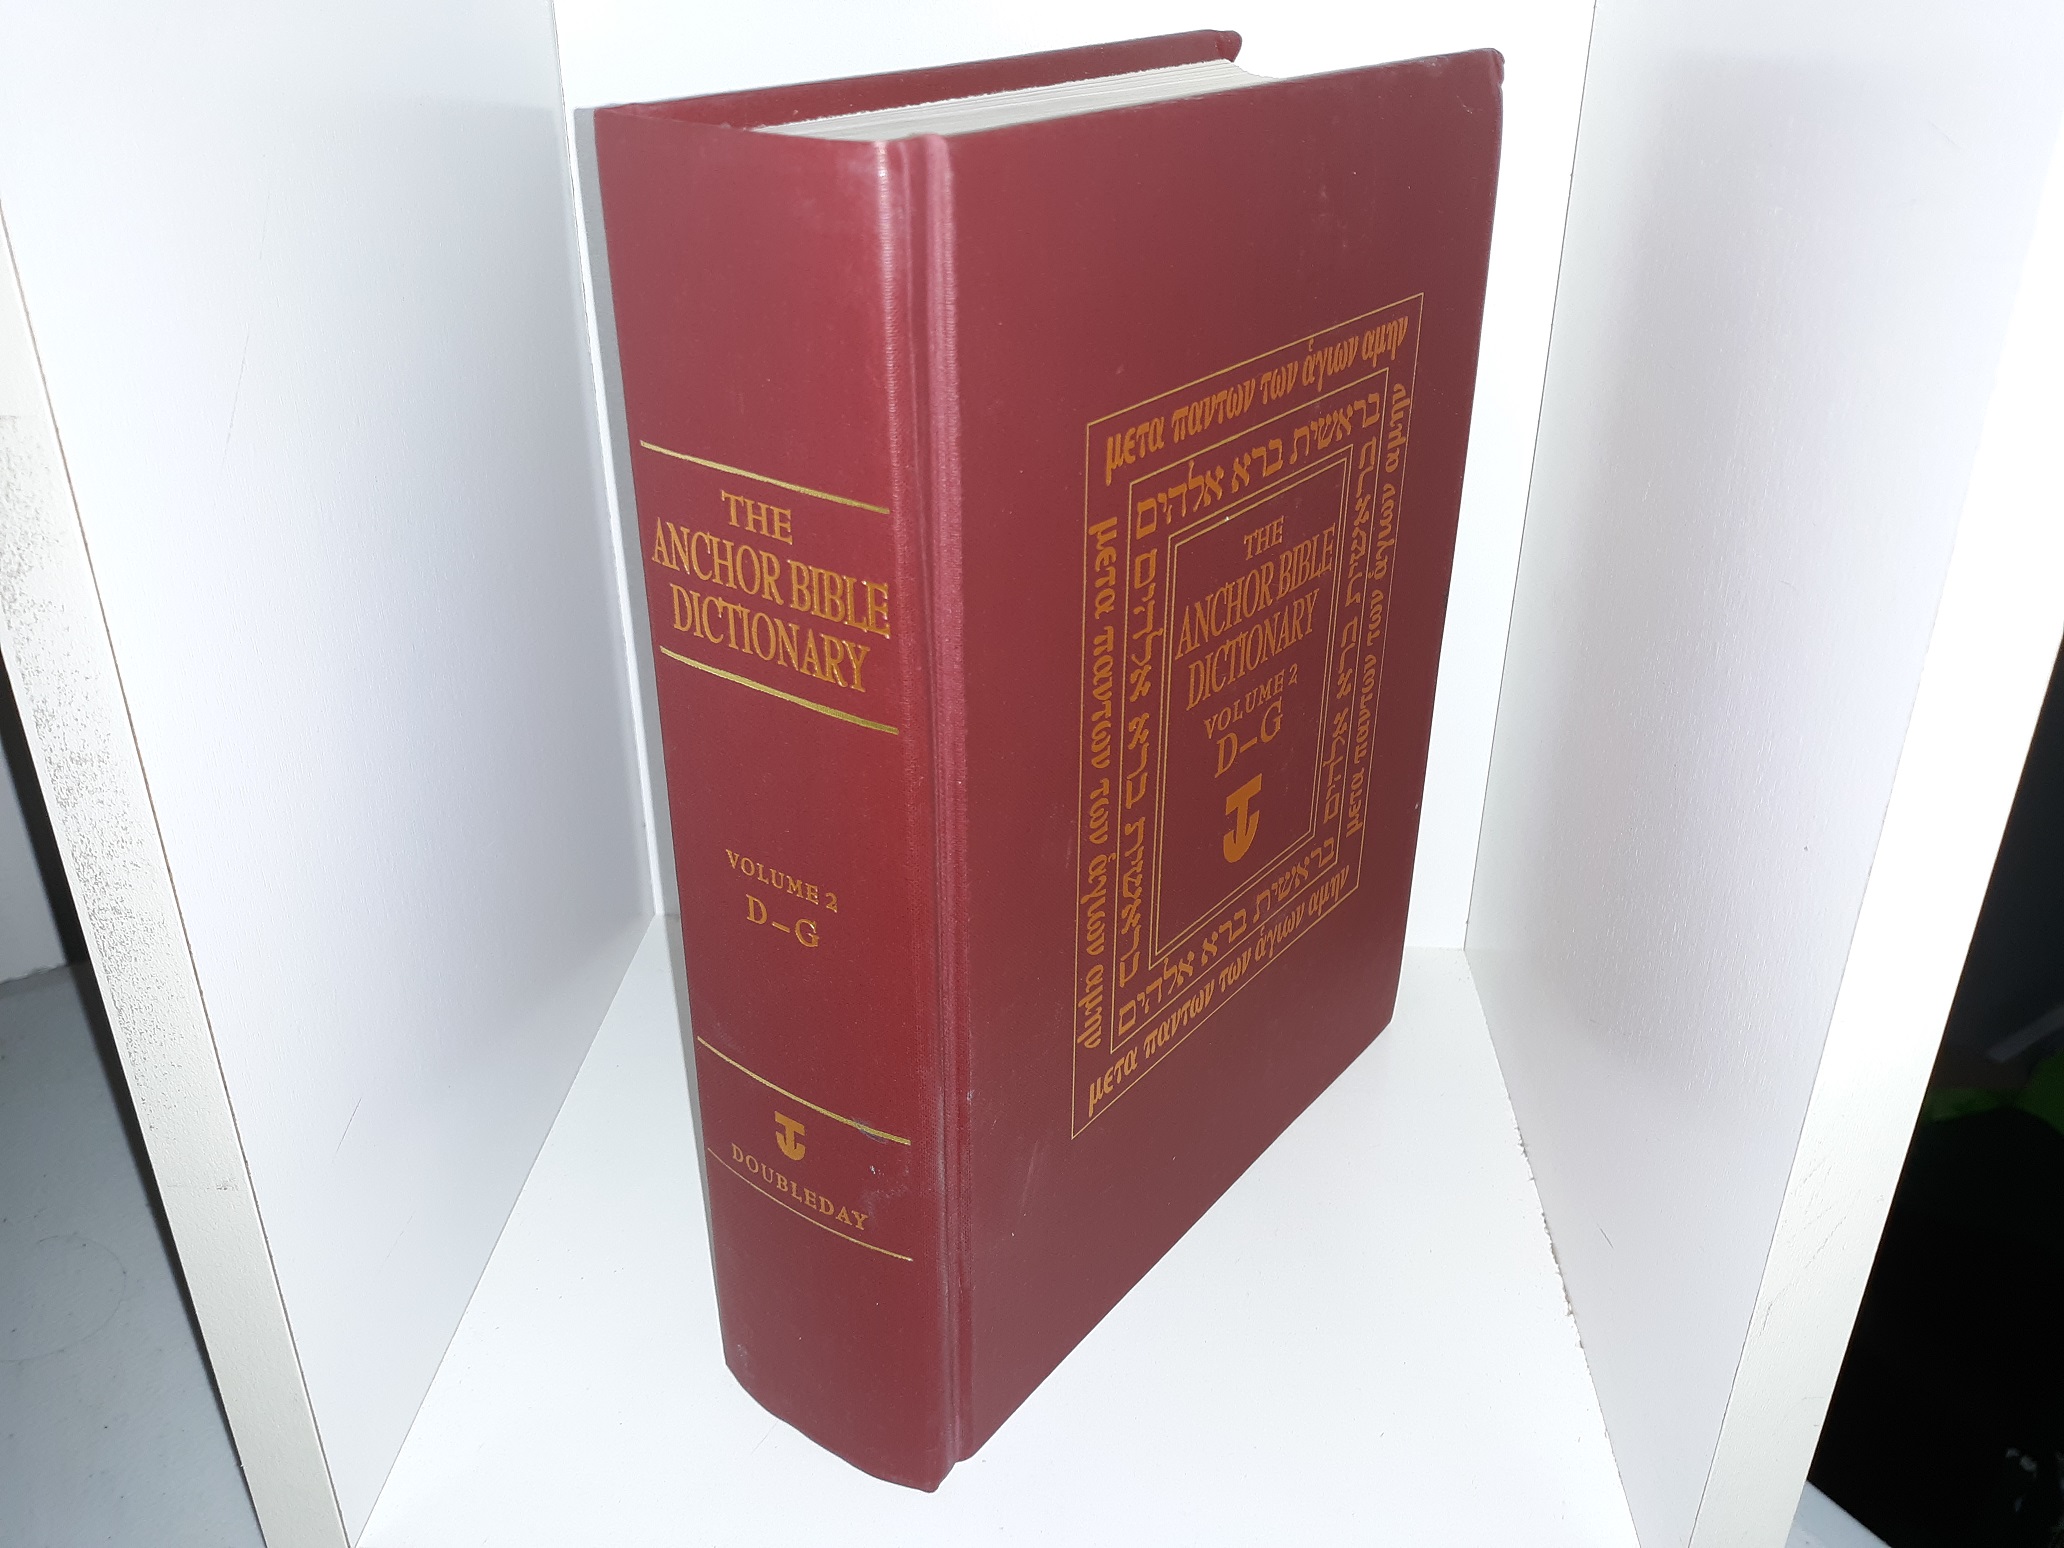 The Anchor Bible Dictionary Vol 2 D G 1992 ~ Edited By David Noel Freedman Eborn Books 6768